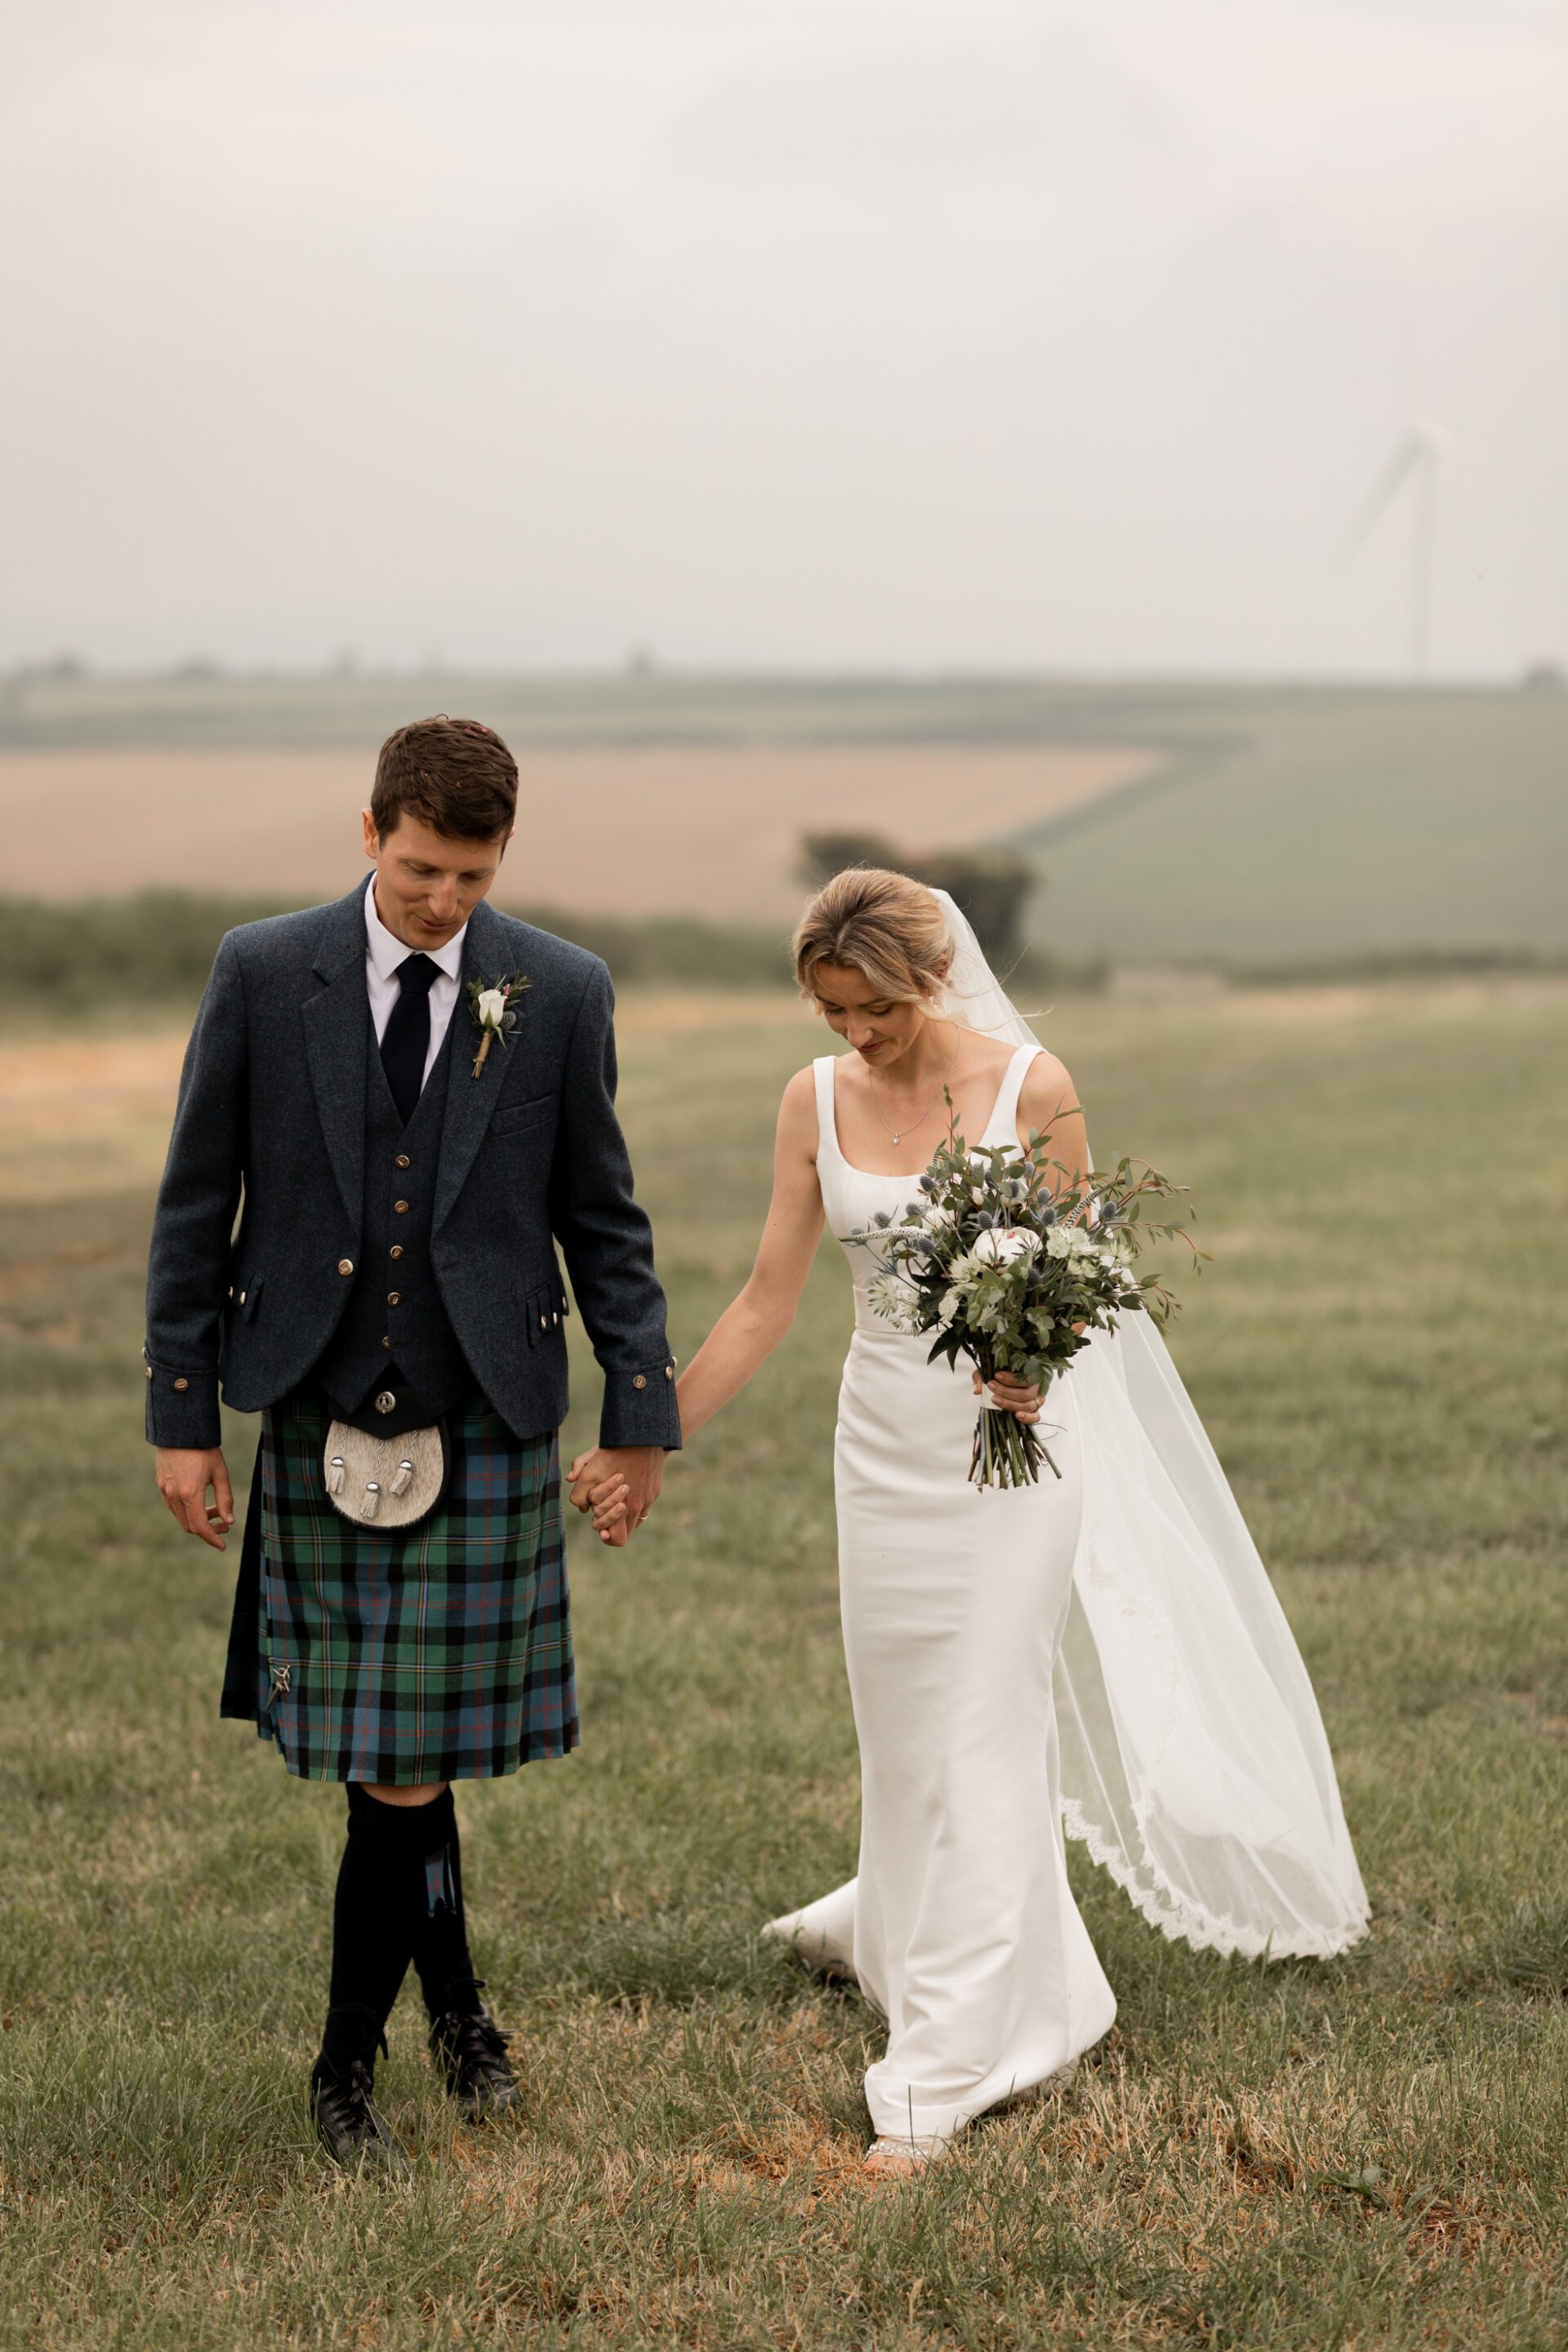 The bride and groom walk hand in hand during their Devon wedding couple portraits